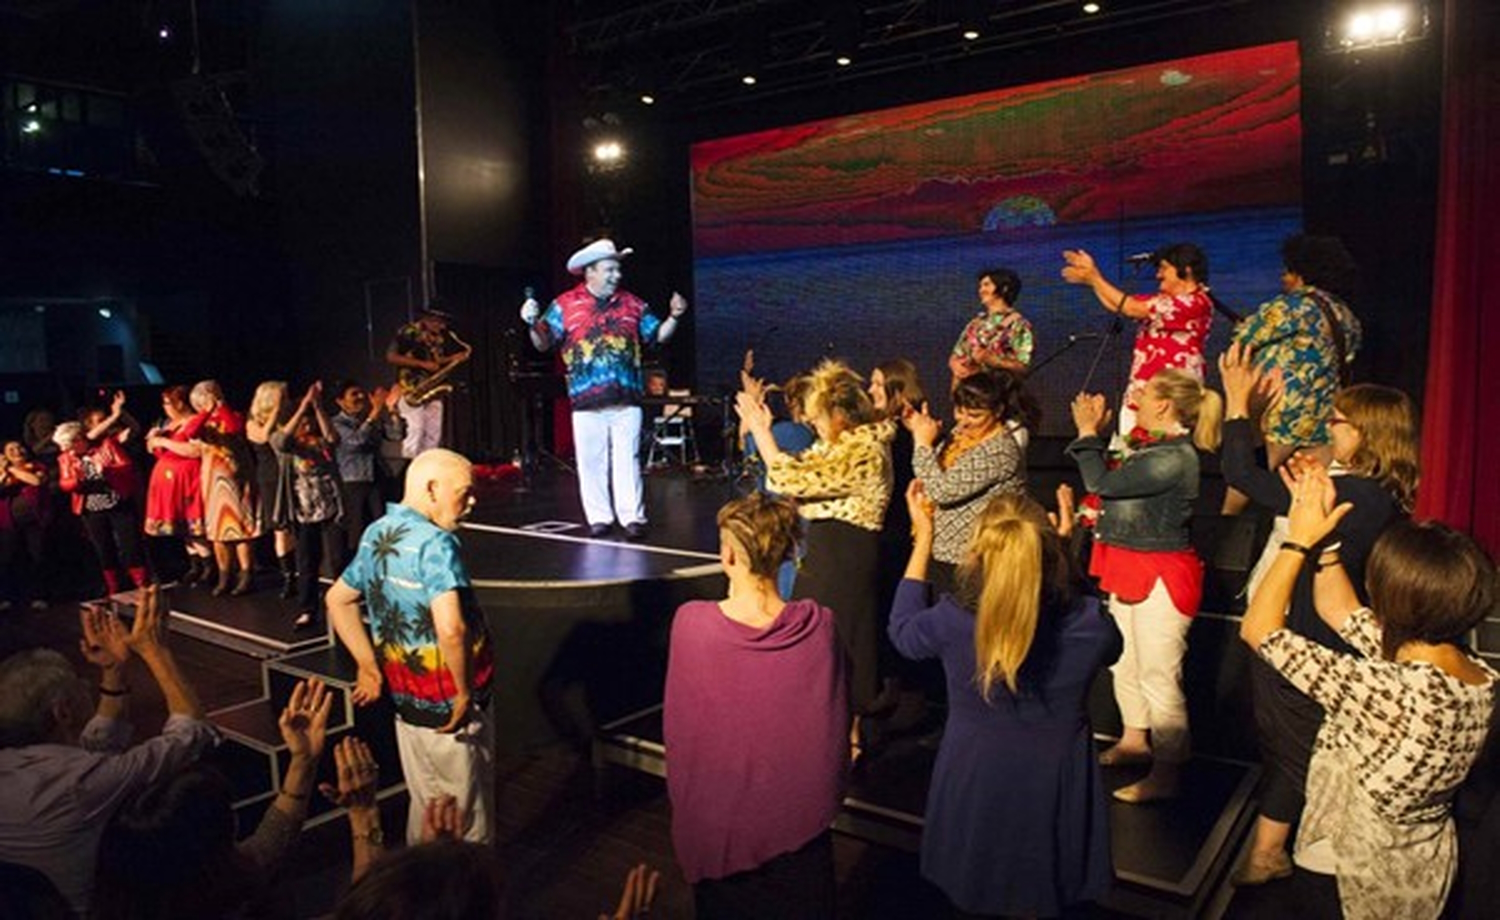 Sparc Theatre's Are You Lonesome Tonight? performance at the Greyhound Hotel. Image of Rodney in cowboy hat and Hawaiian shirt surrounded by a large number of audience members who applaud him energetically. Rodney has both thumbs up, happy in response. Photo by Paul Dunn.